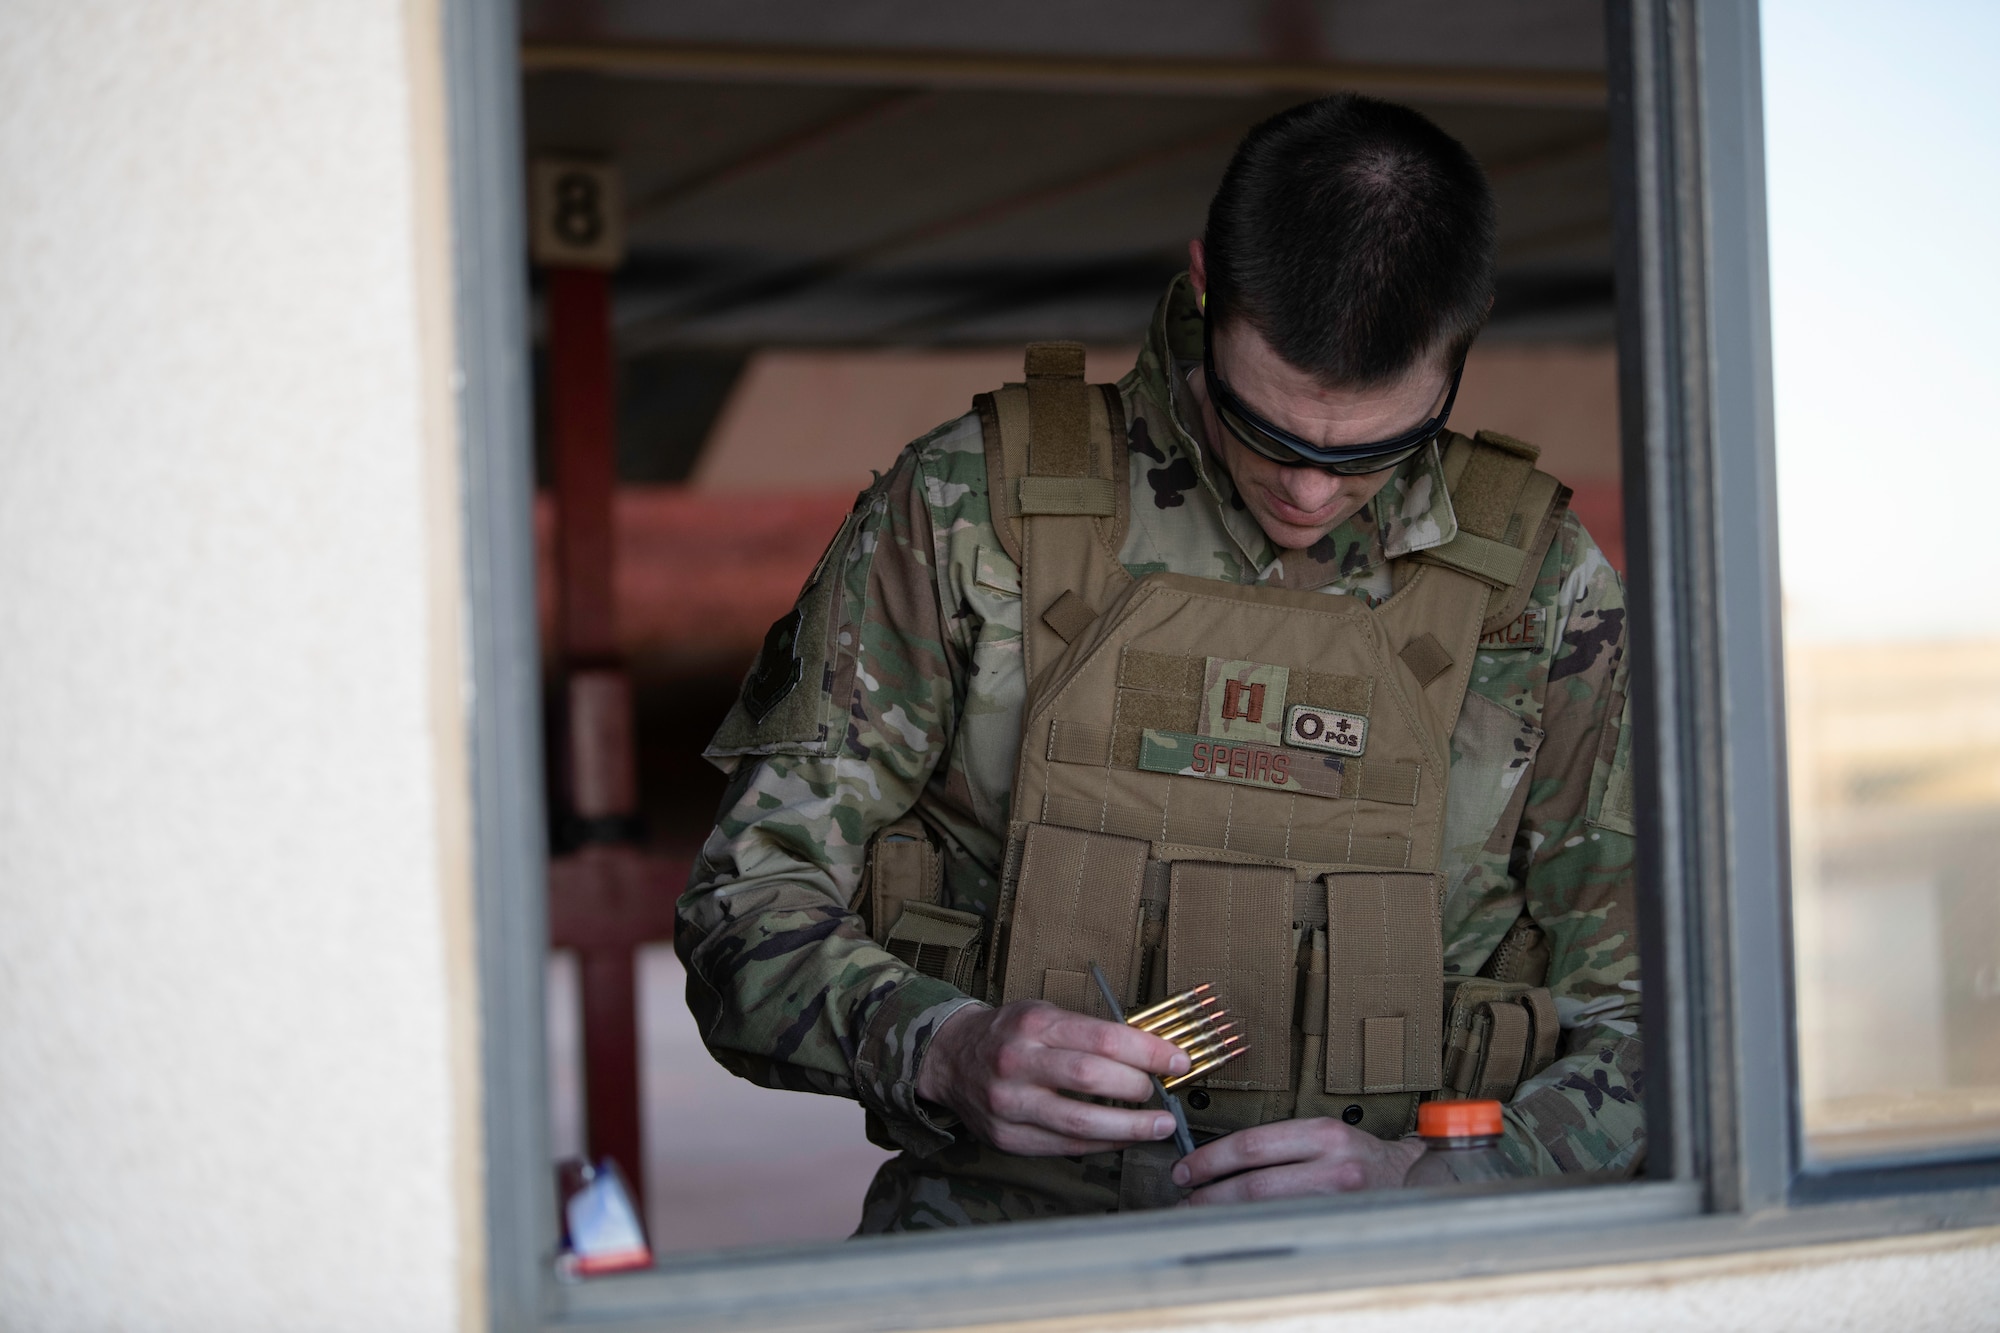 U.S. Air Force Capt. Gregory Speirs, 621st Contingency Response Wing judge advocate, loads 5.56 mm frangible rounds into a magazine at Travis Air Force Base, California, May 27, 2020. Speirs participated in an M-4 Rifle/Carbine Air Force qualification course at the 60th Security Forces Squadron combat arms training and maintenance range. The CATM section trains Airmen on 10 weapon systems. (U.S. Air Force photo by Tech. Sgt. James Hodgman)